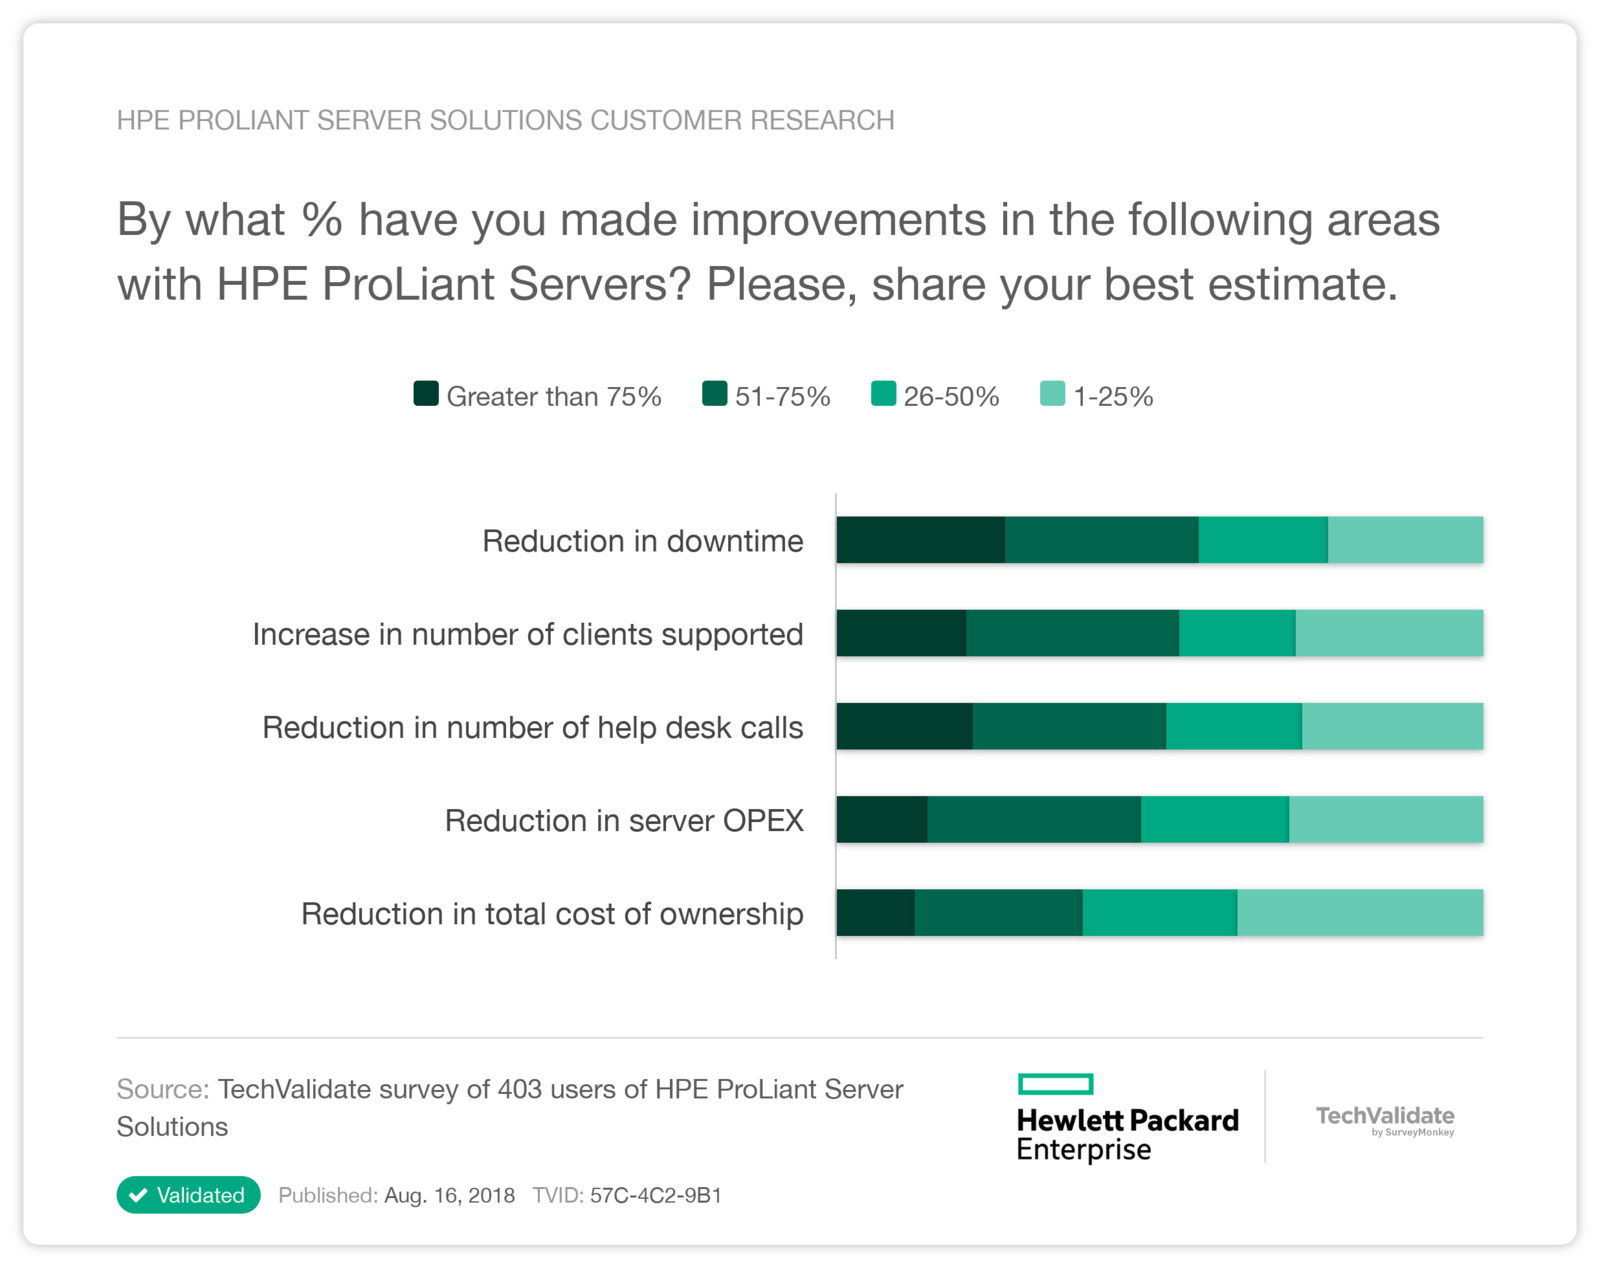 HPE ProLiant Server Solutions Customer Research